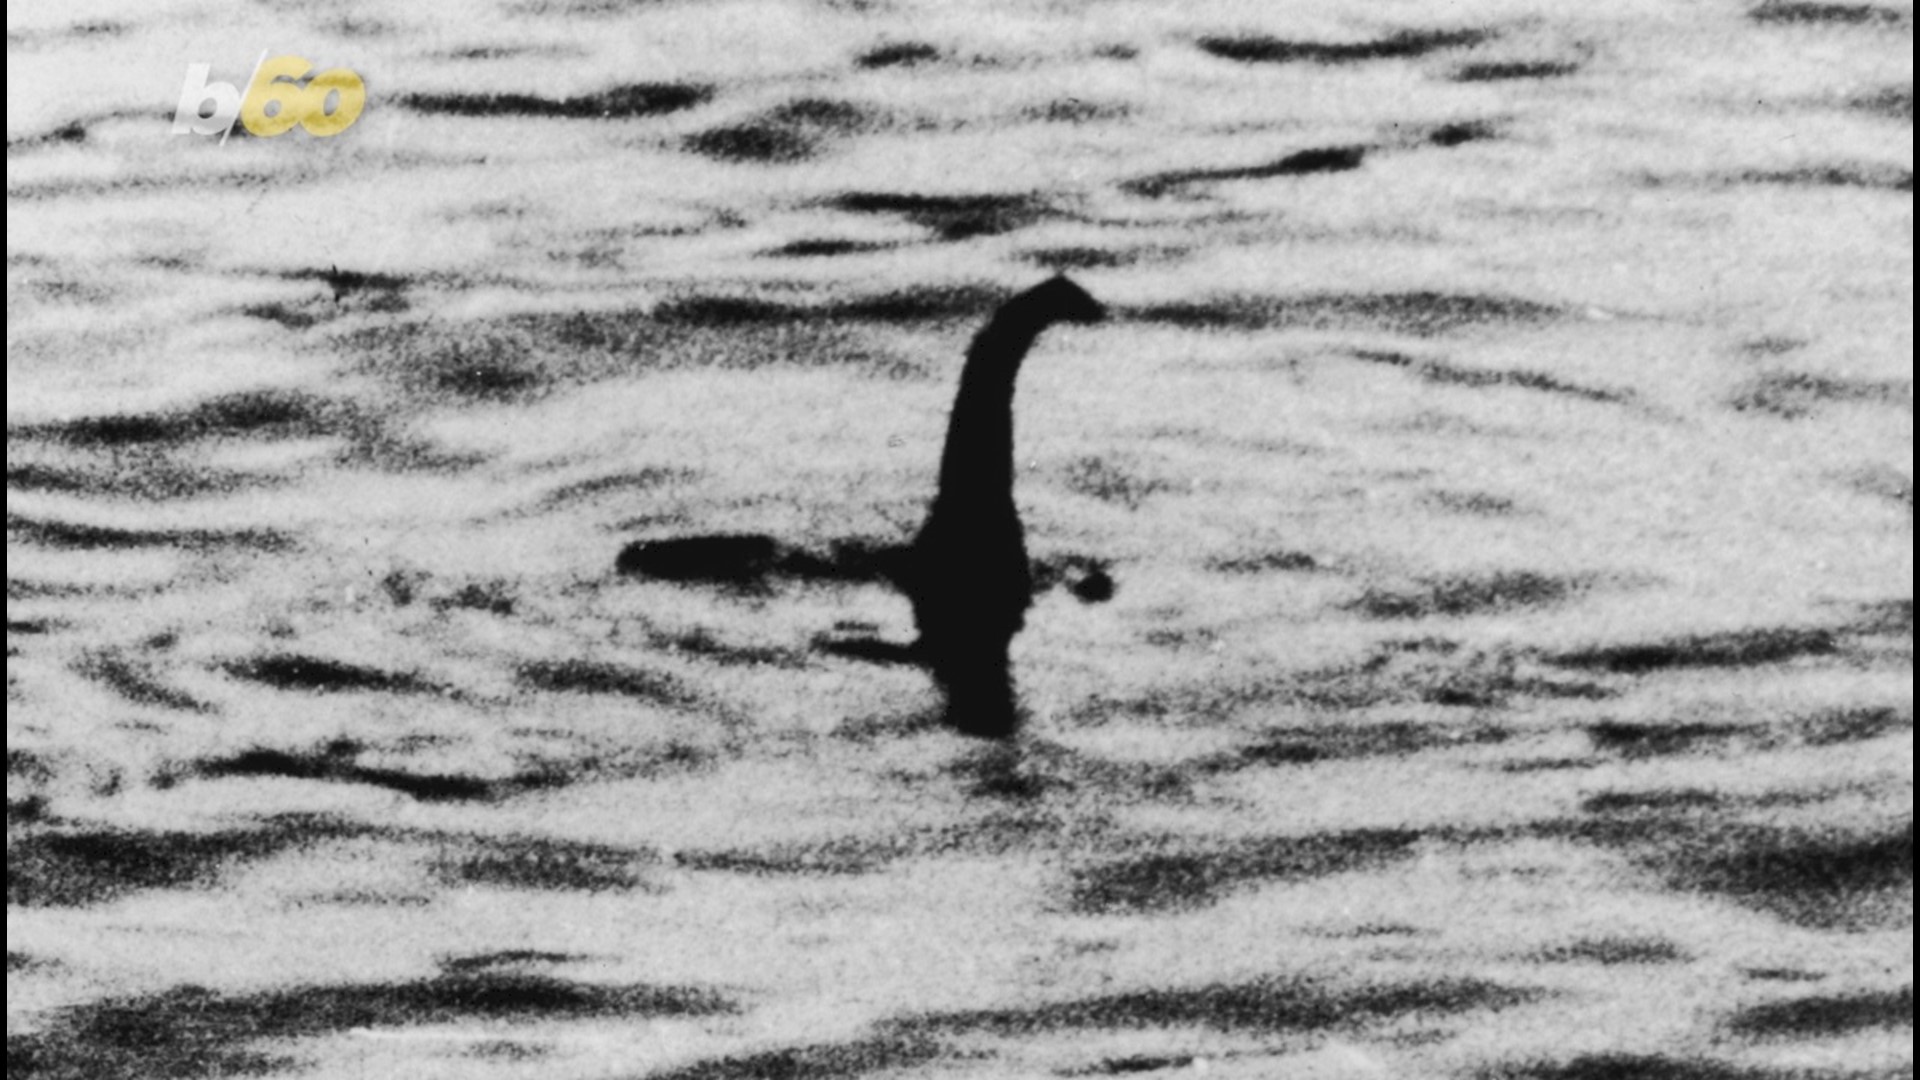 Researchers reveal plausible loch ness monster theory